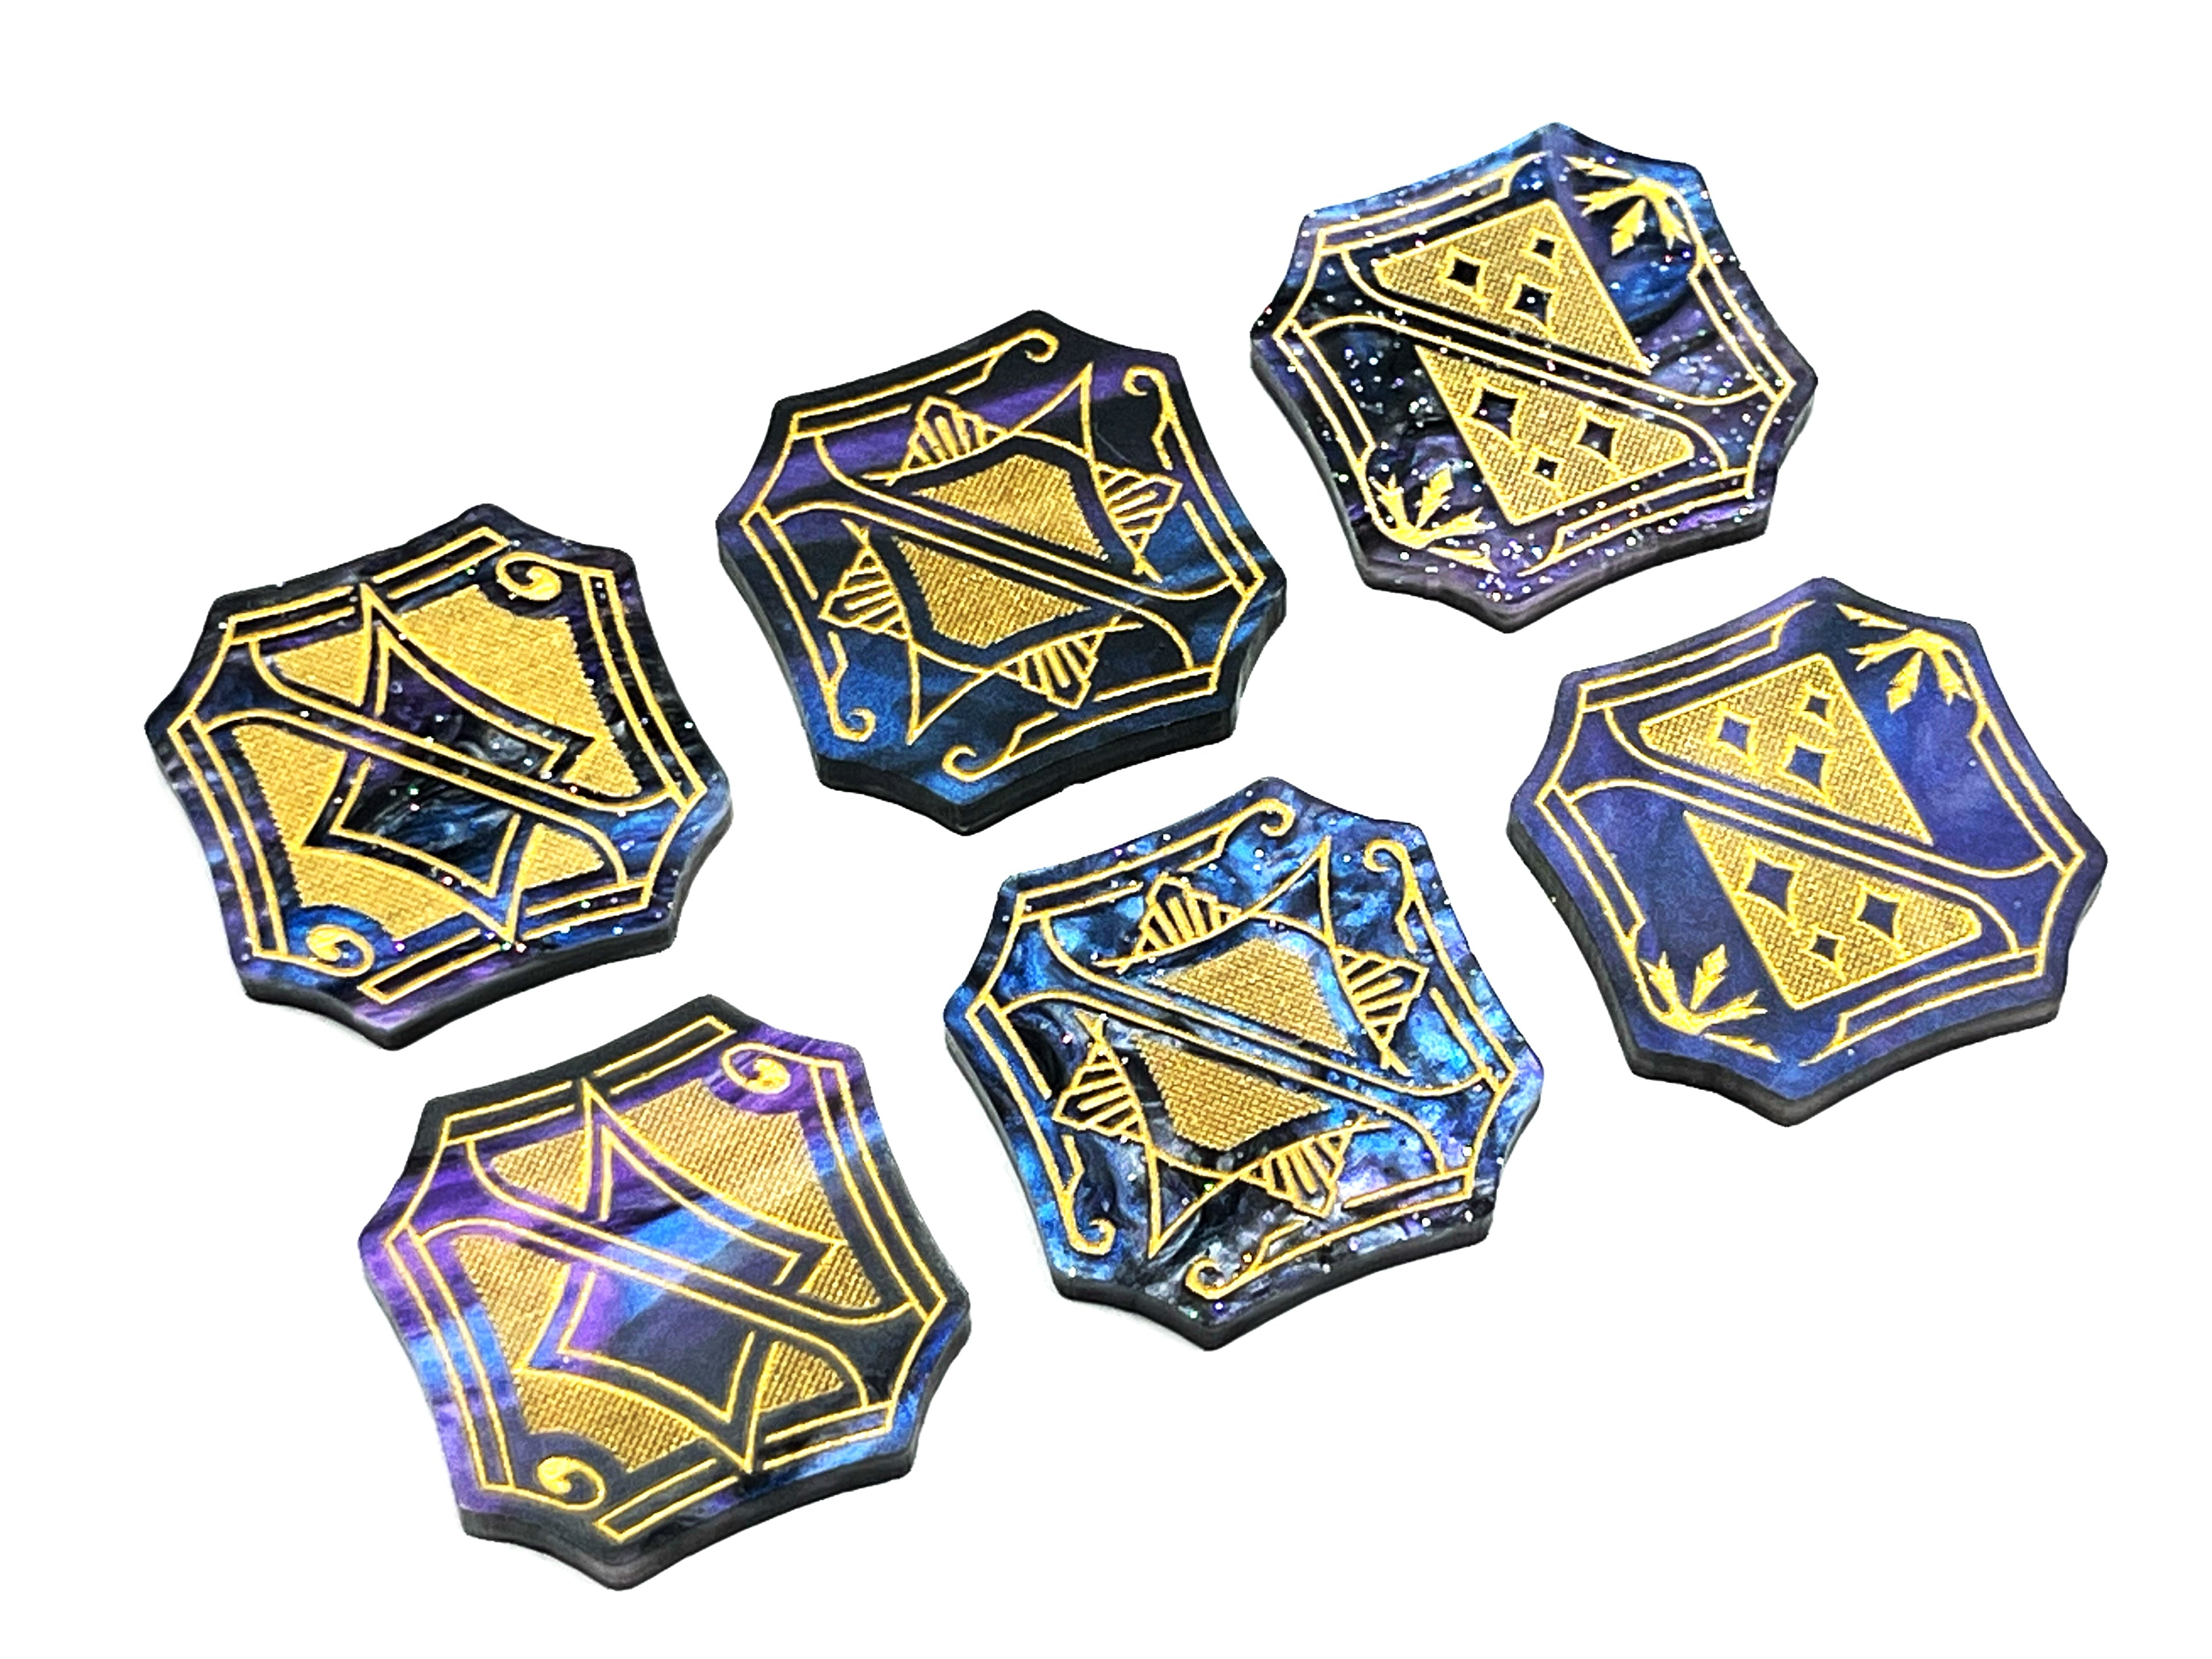 'Can't Quest, Challenge, Ready' Token Set